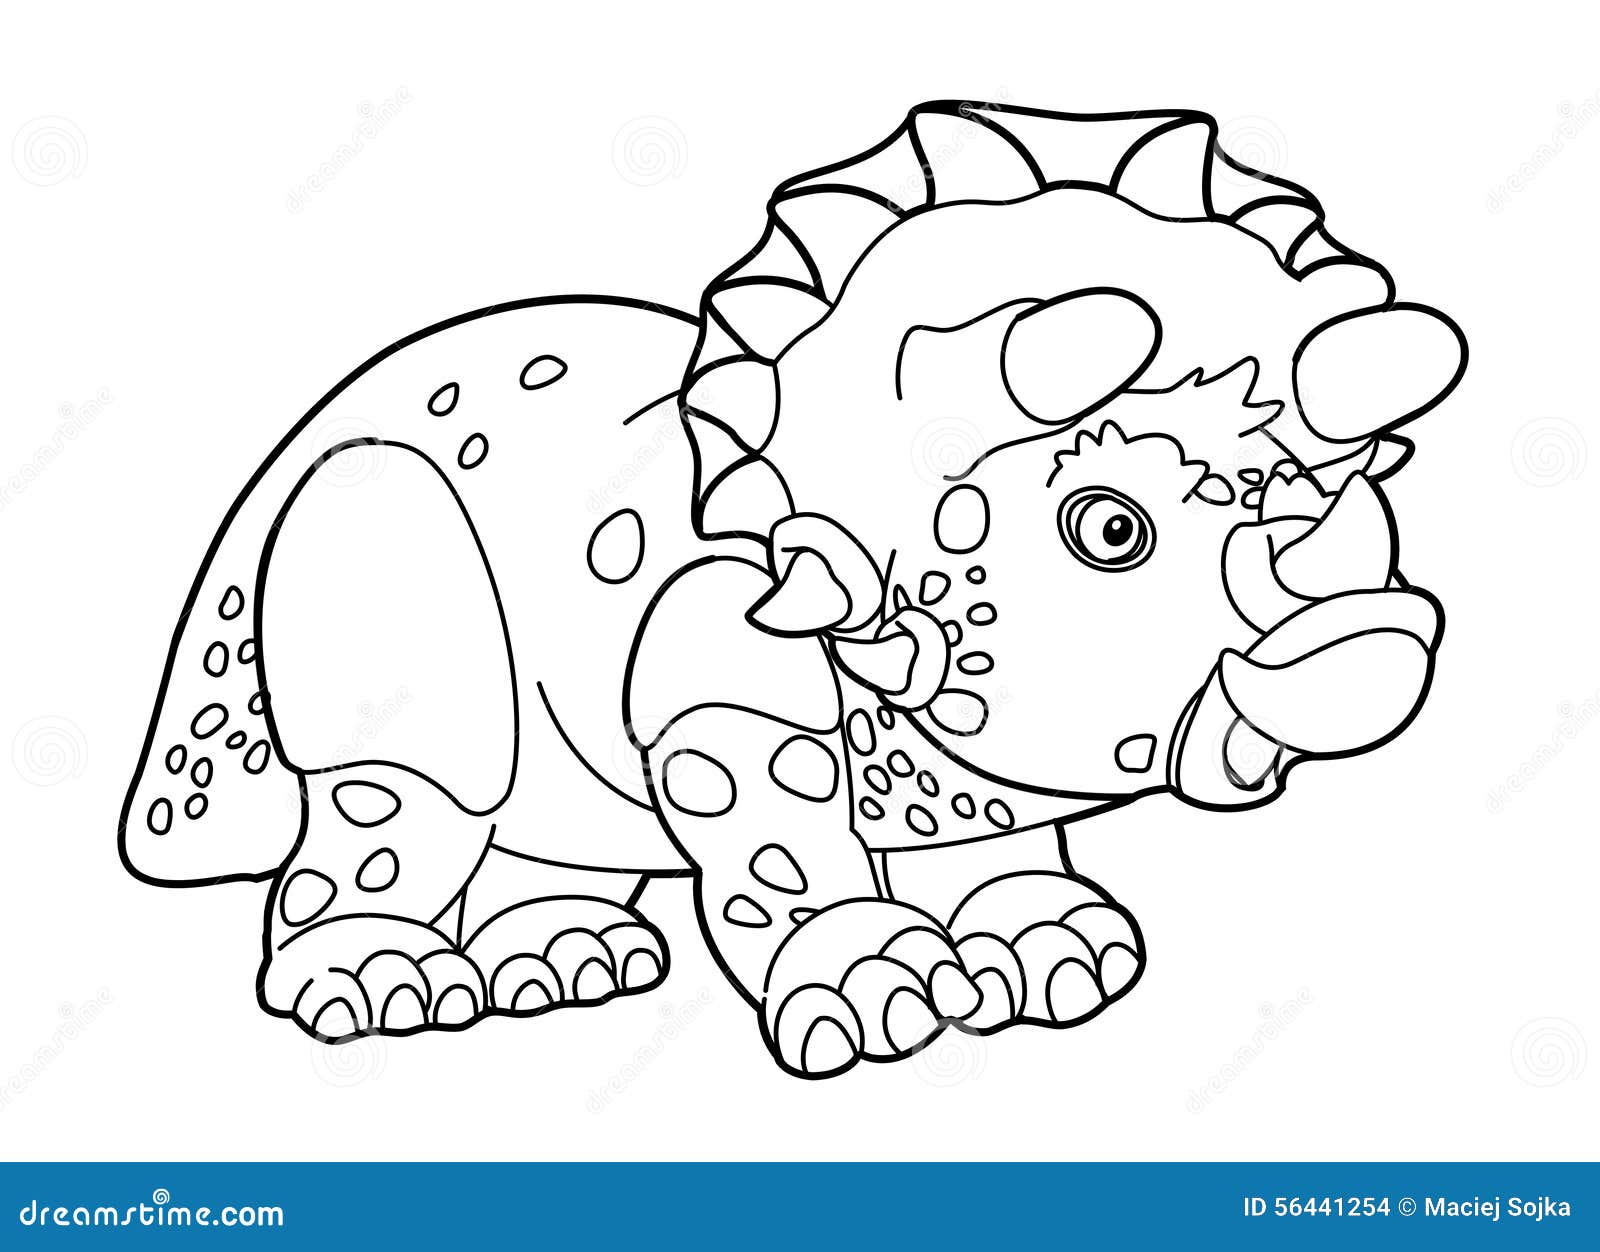 underwater dinosaurs coloring pages - photo #24